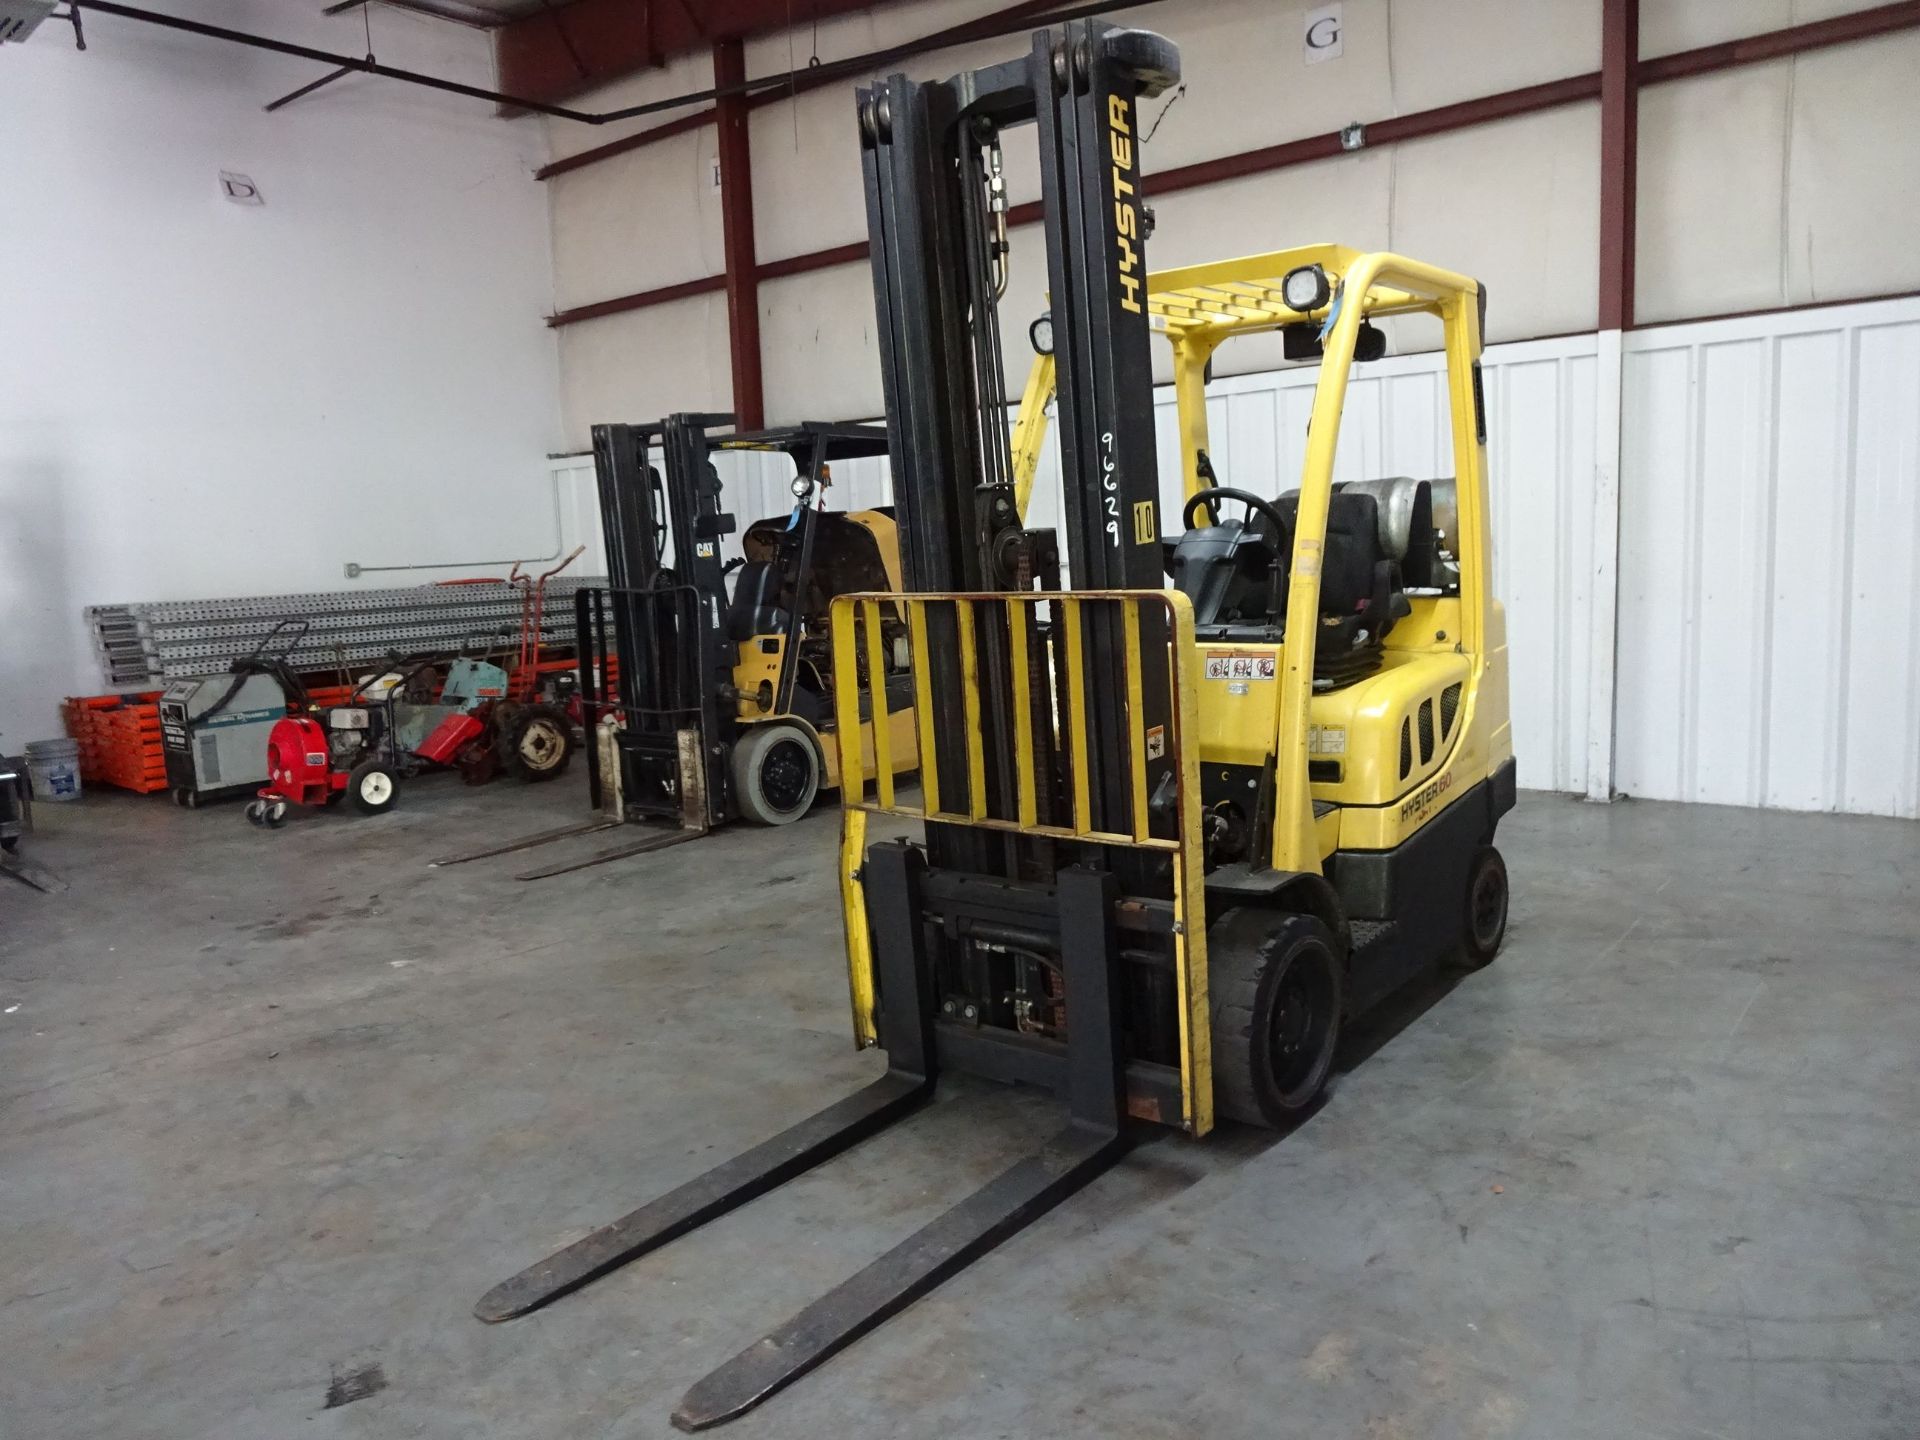 6,000 LB. HYSTER MDOEL S60FT SOLID TIRE LP GAS LIFT TRUCK; S/N F187V17319J (13,865 HOURS), 3-STAGE